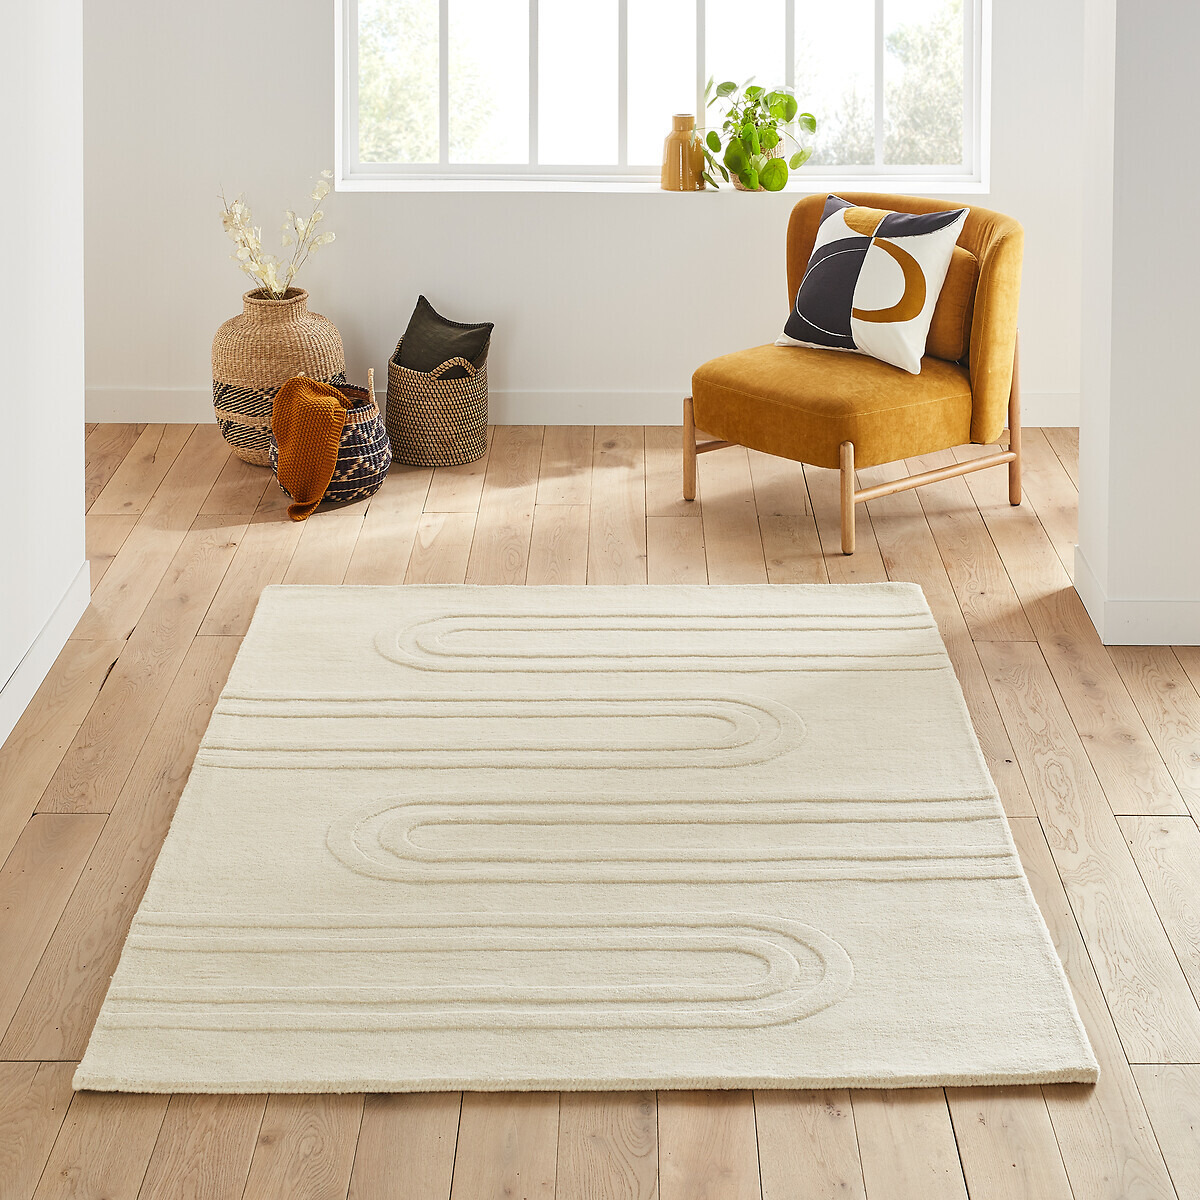 Ary Graphic Textured 100% Wool Rug - image 1